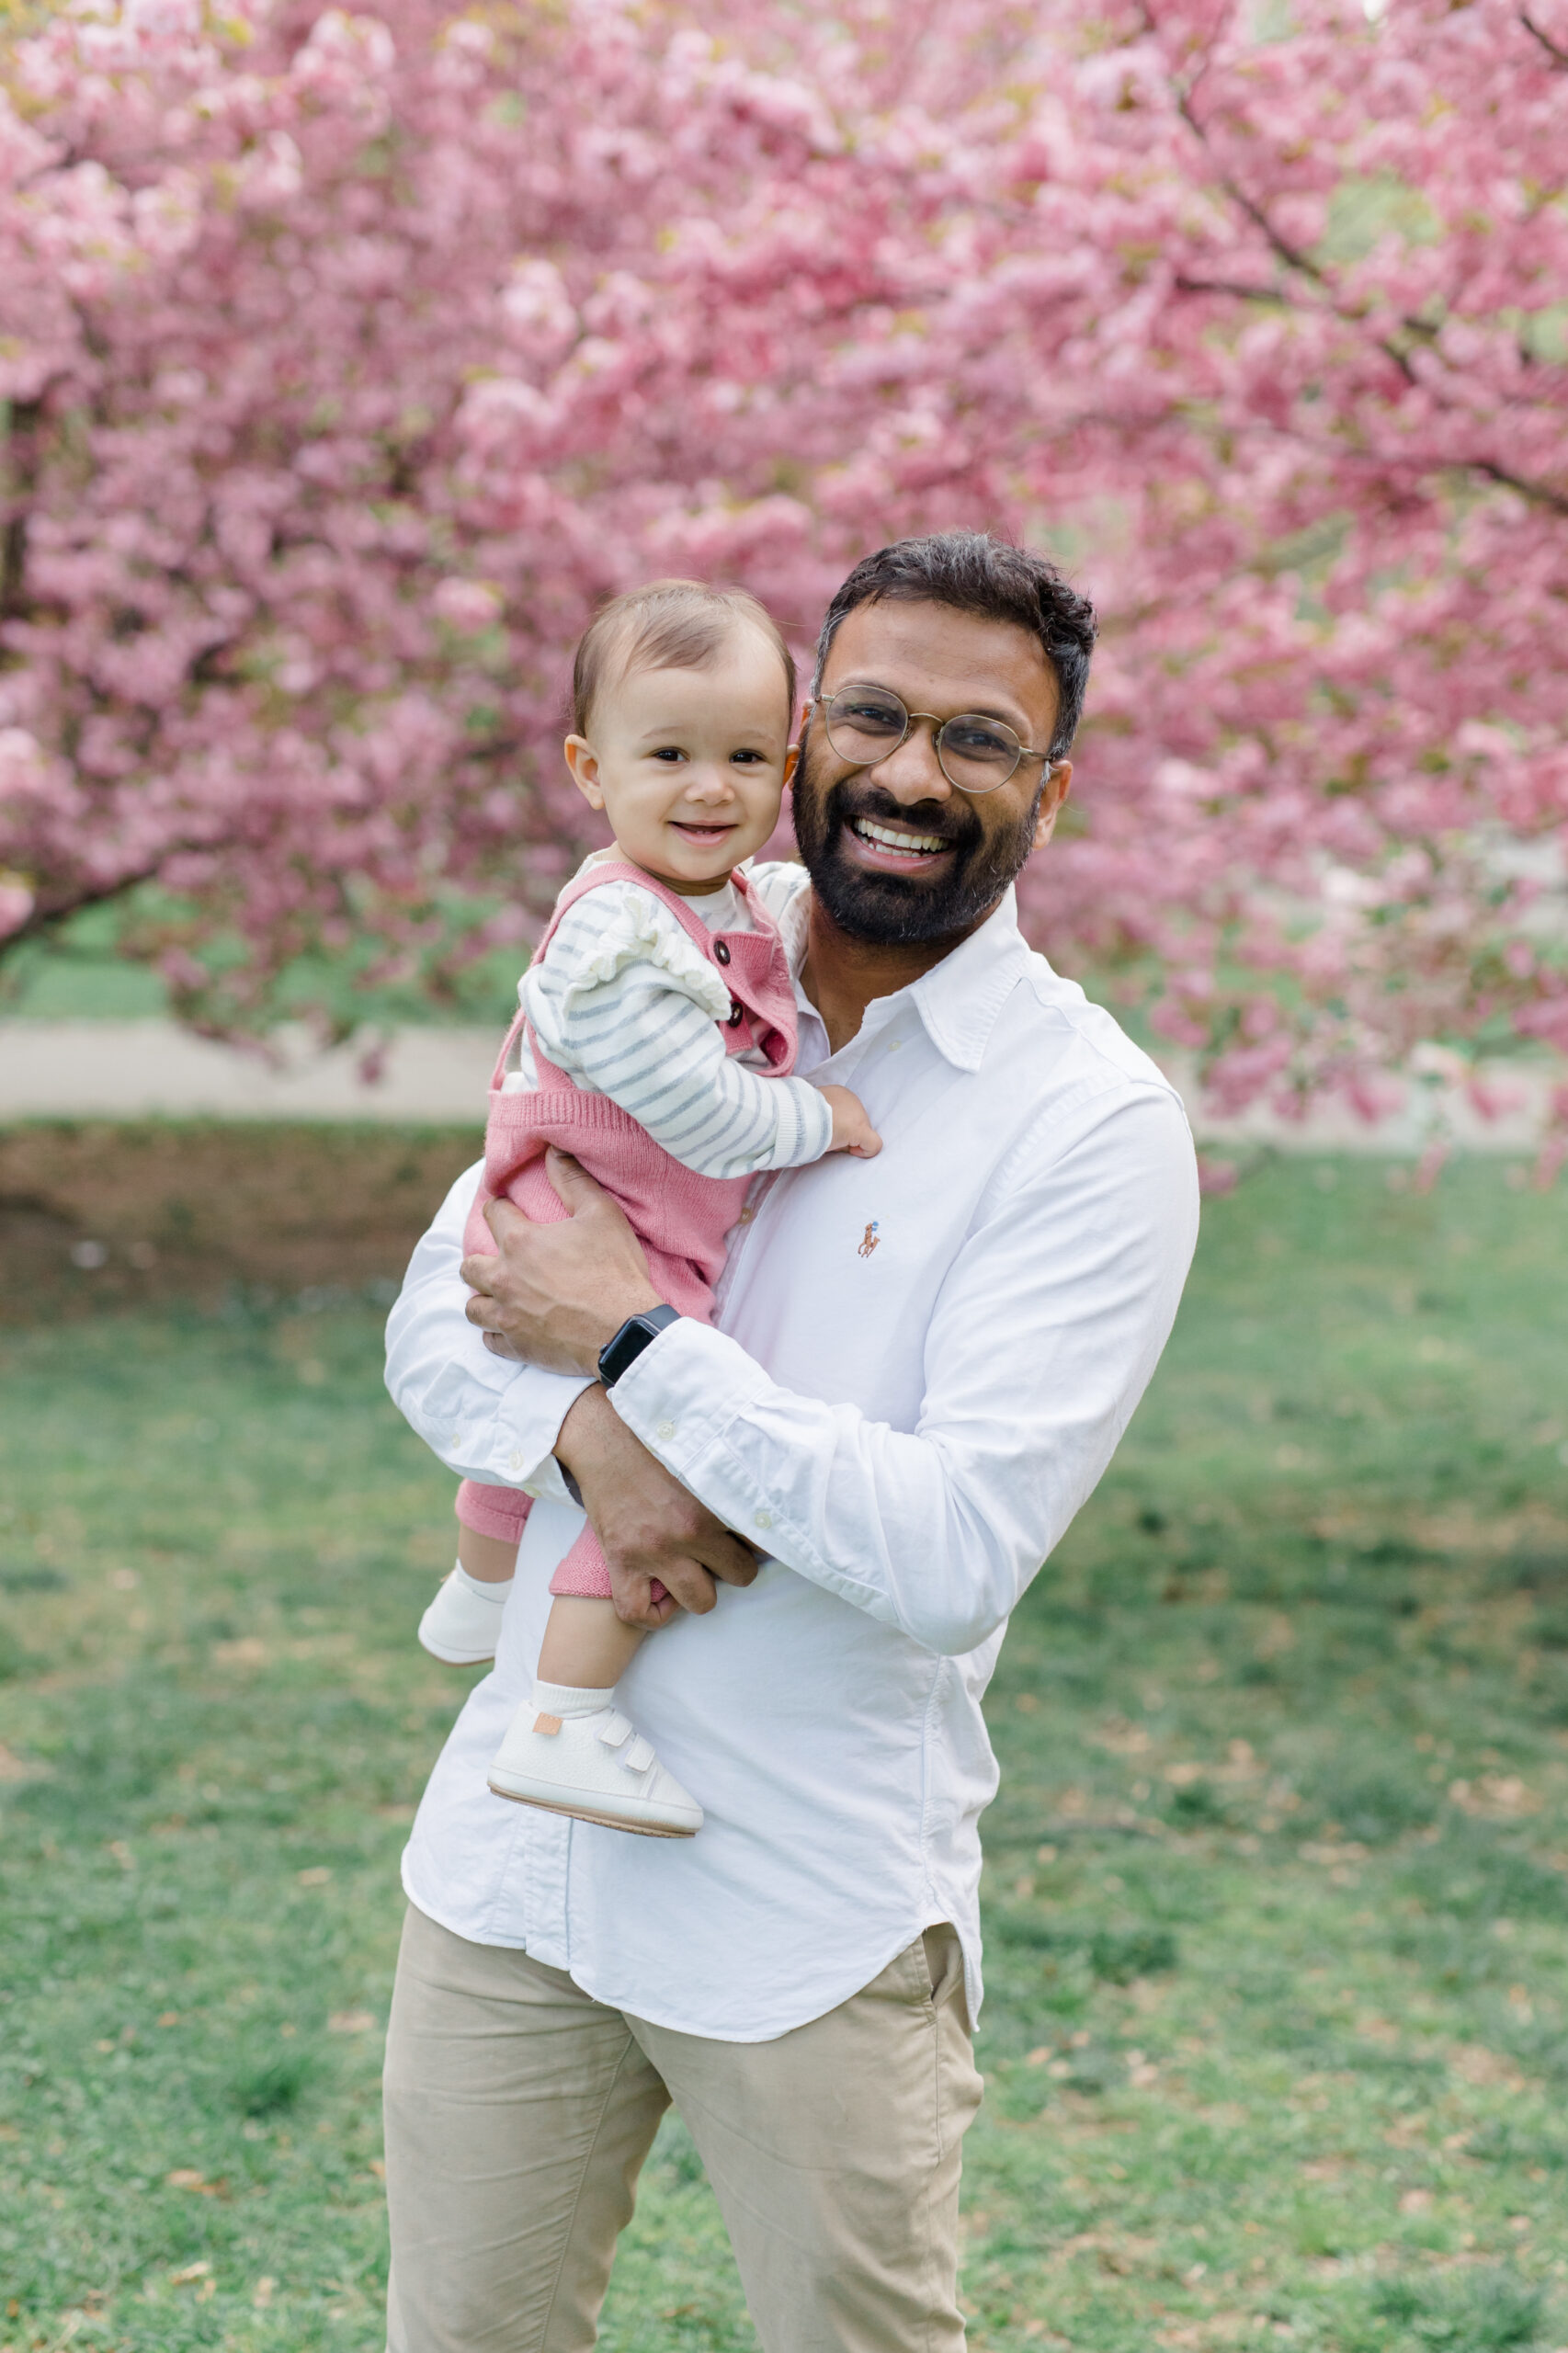 A dad holds his baby in the cherry blossoms at a spring family mini session in Central Park shot by Jacqueline Clair Photography